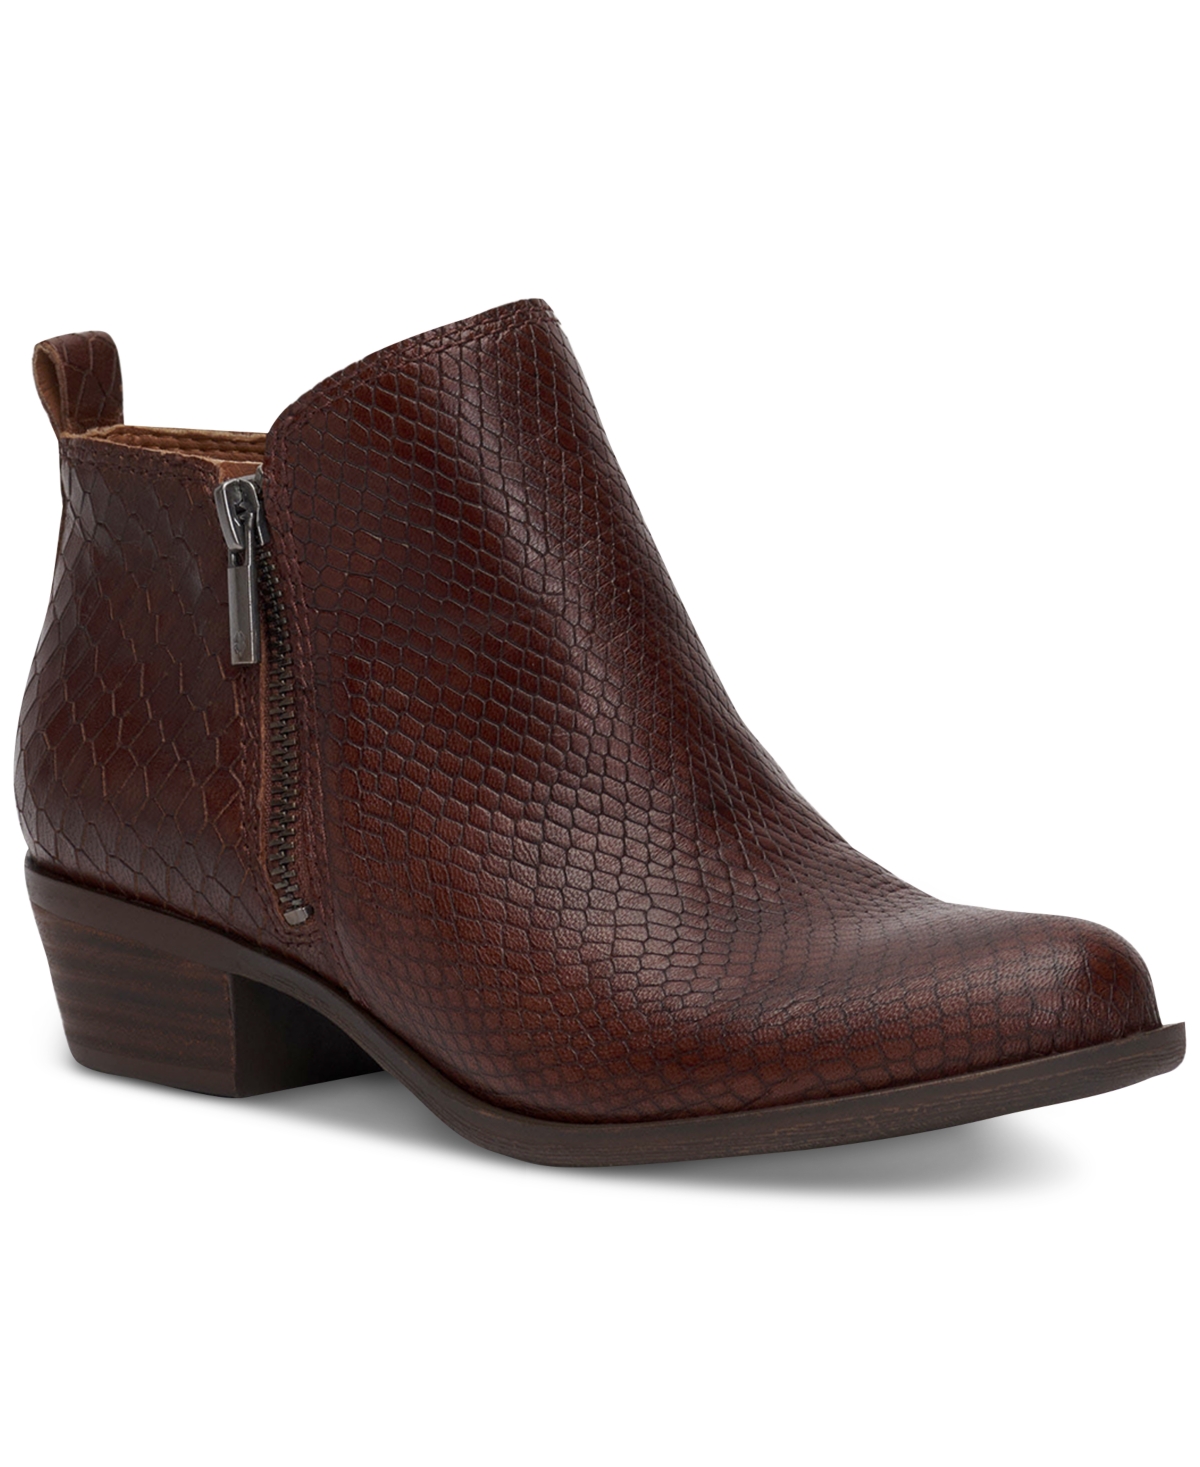 LUCKY BRAND WOMEN'S BASEL ANKLE BOOTIES